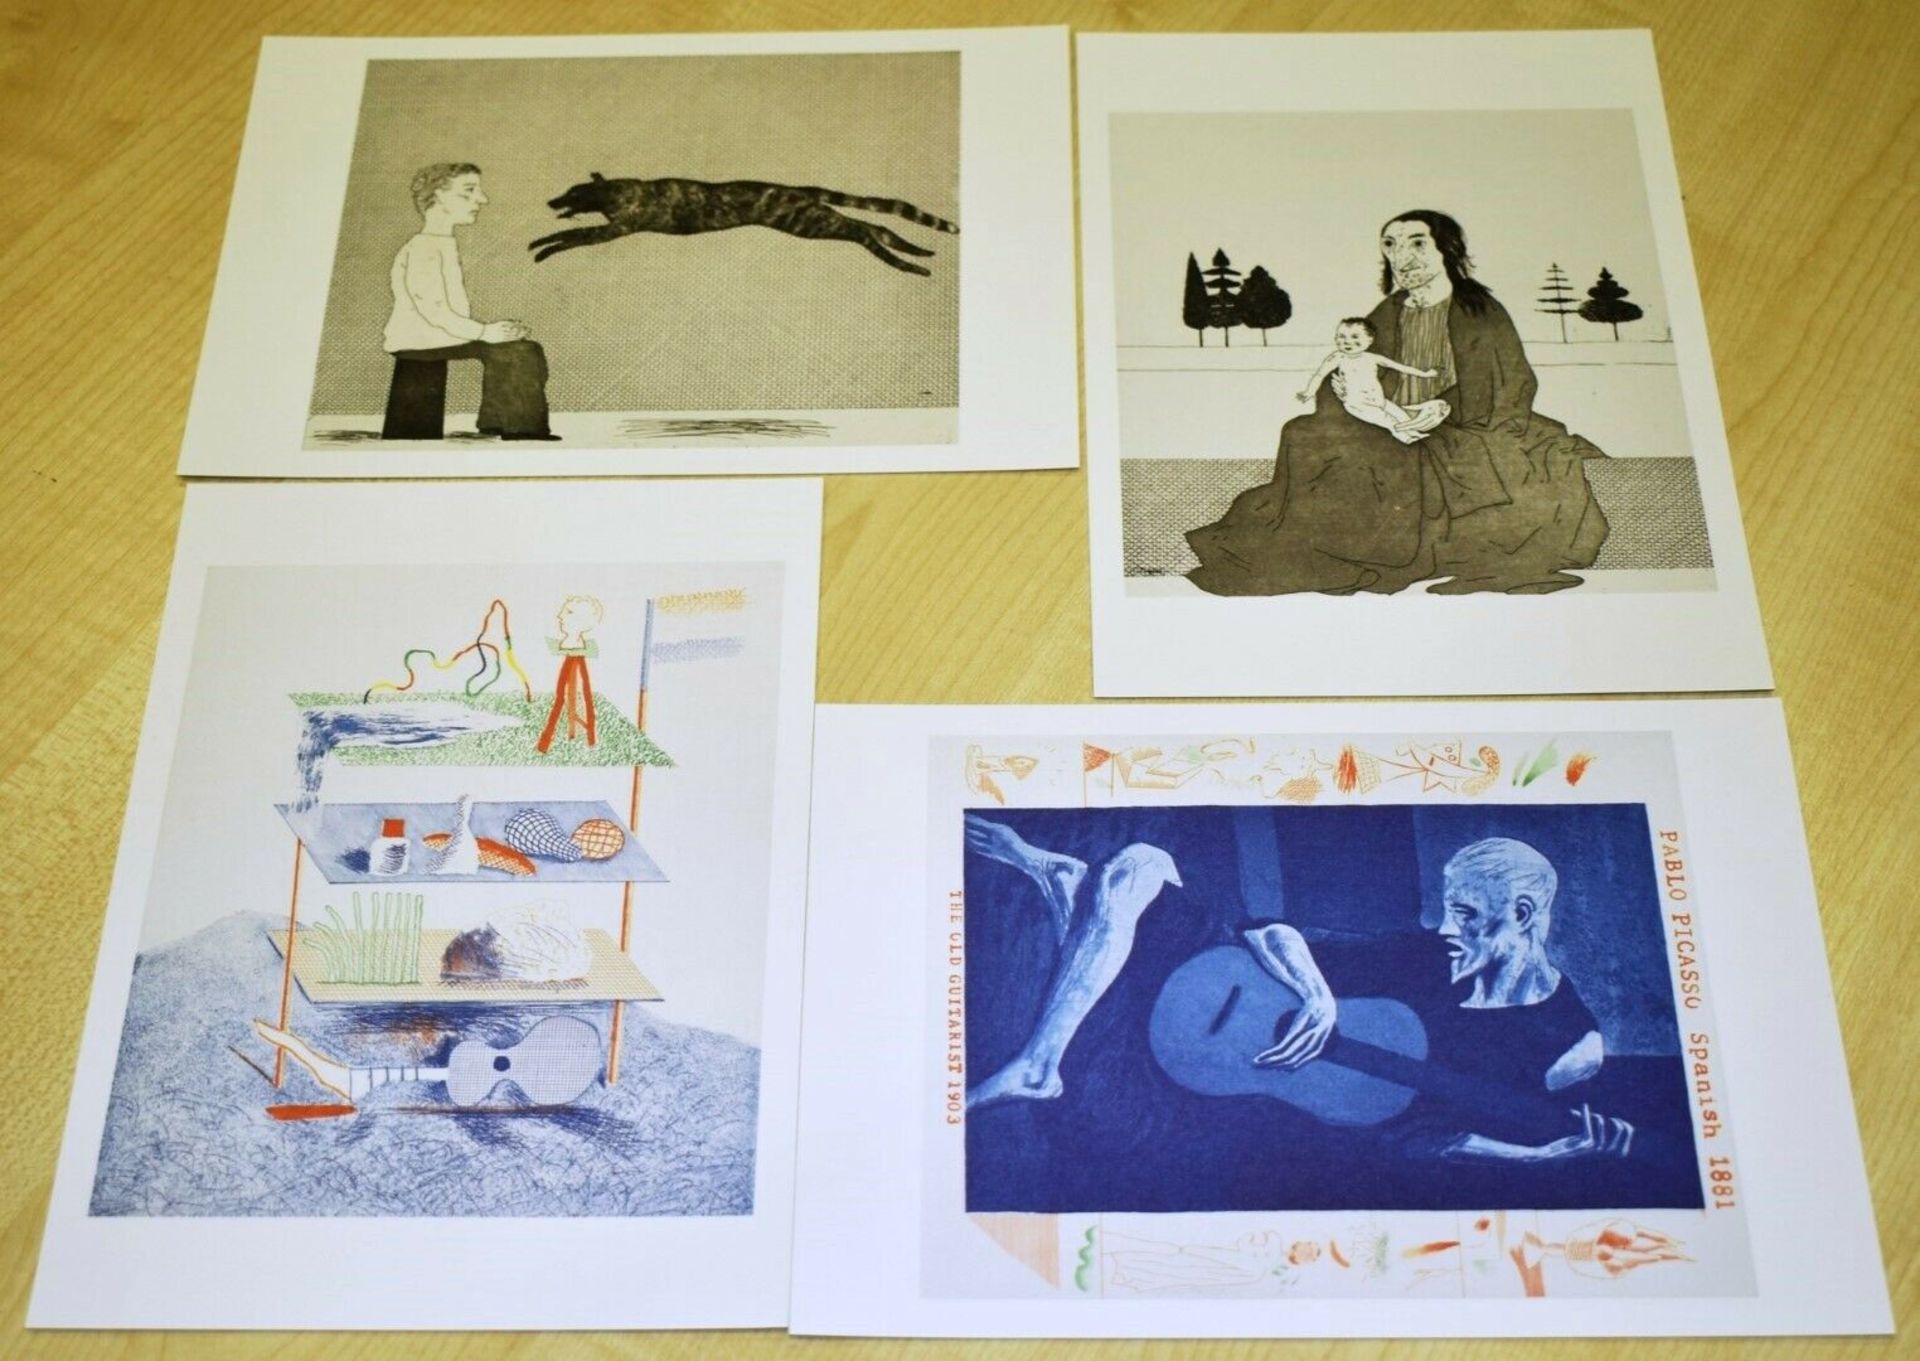 1 x David Hockney Words & Pictures - British Council Touring Program With 11 Prints - Brand New - Image 7 of 9